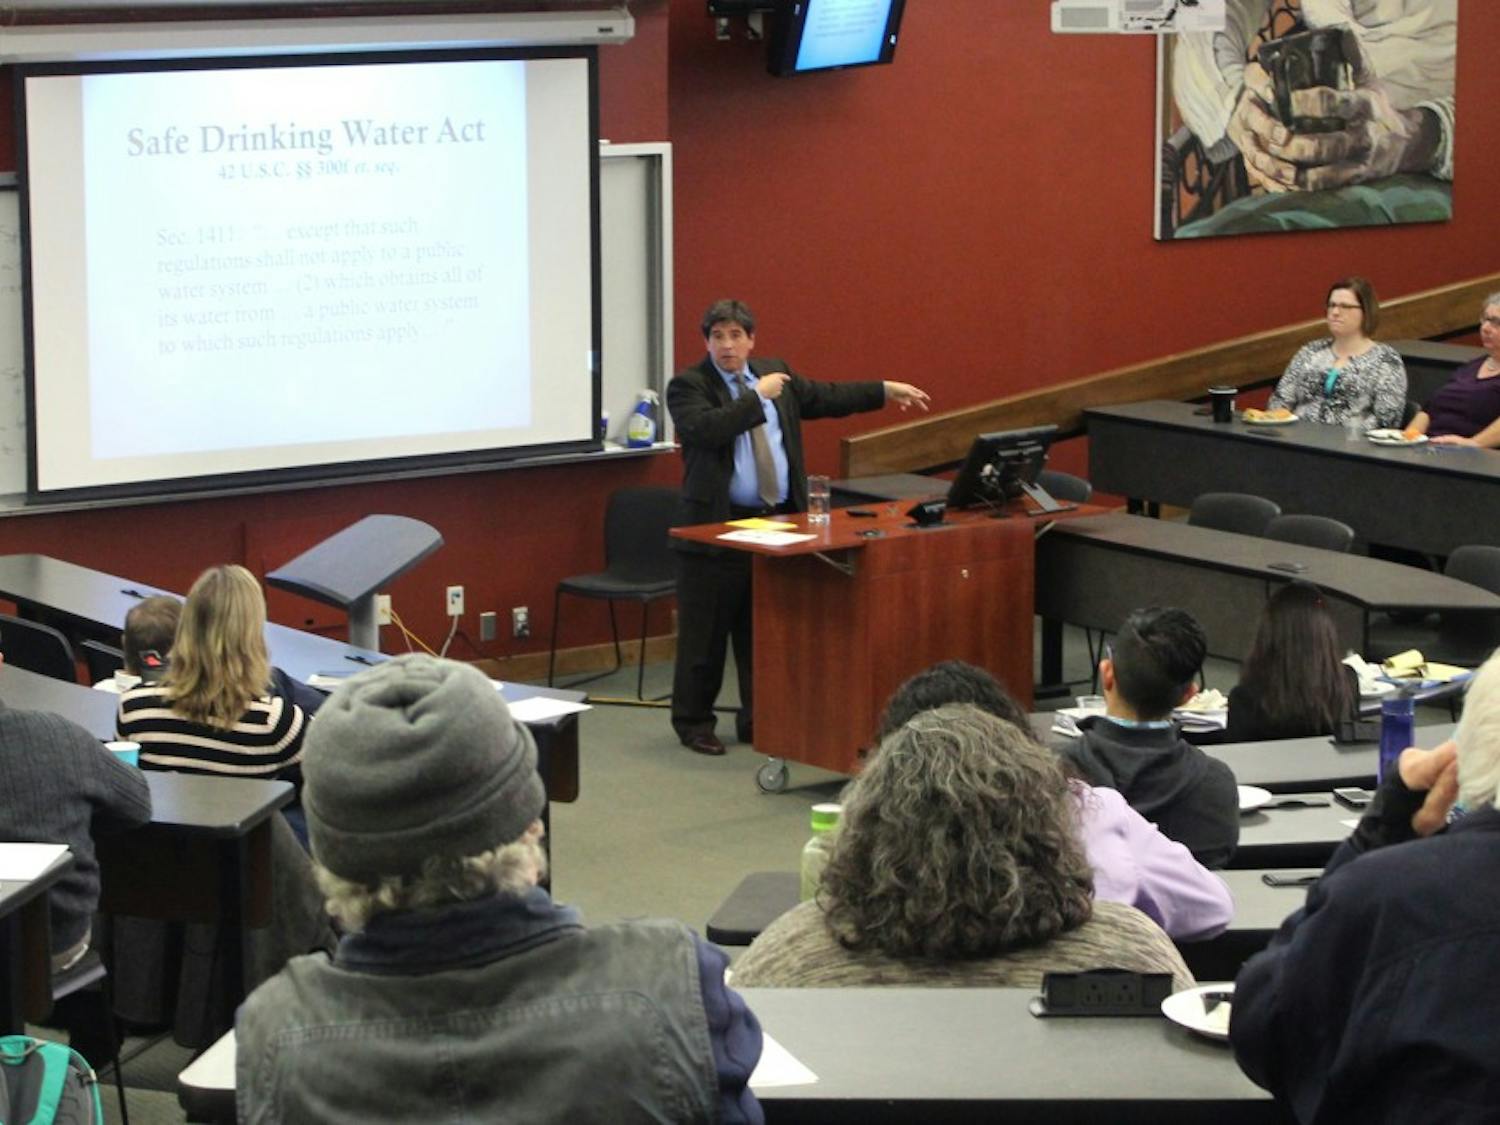 Professor Cliff Villa, who teaches in the Environmental and Natural Resources Program at the UNM Law School, presents a talk on Flint’s contaminated water crisis.